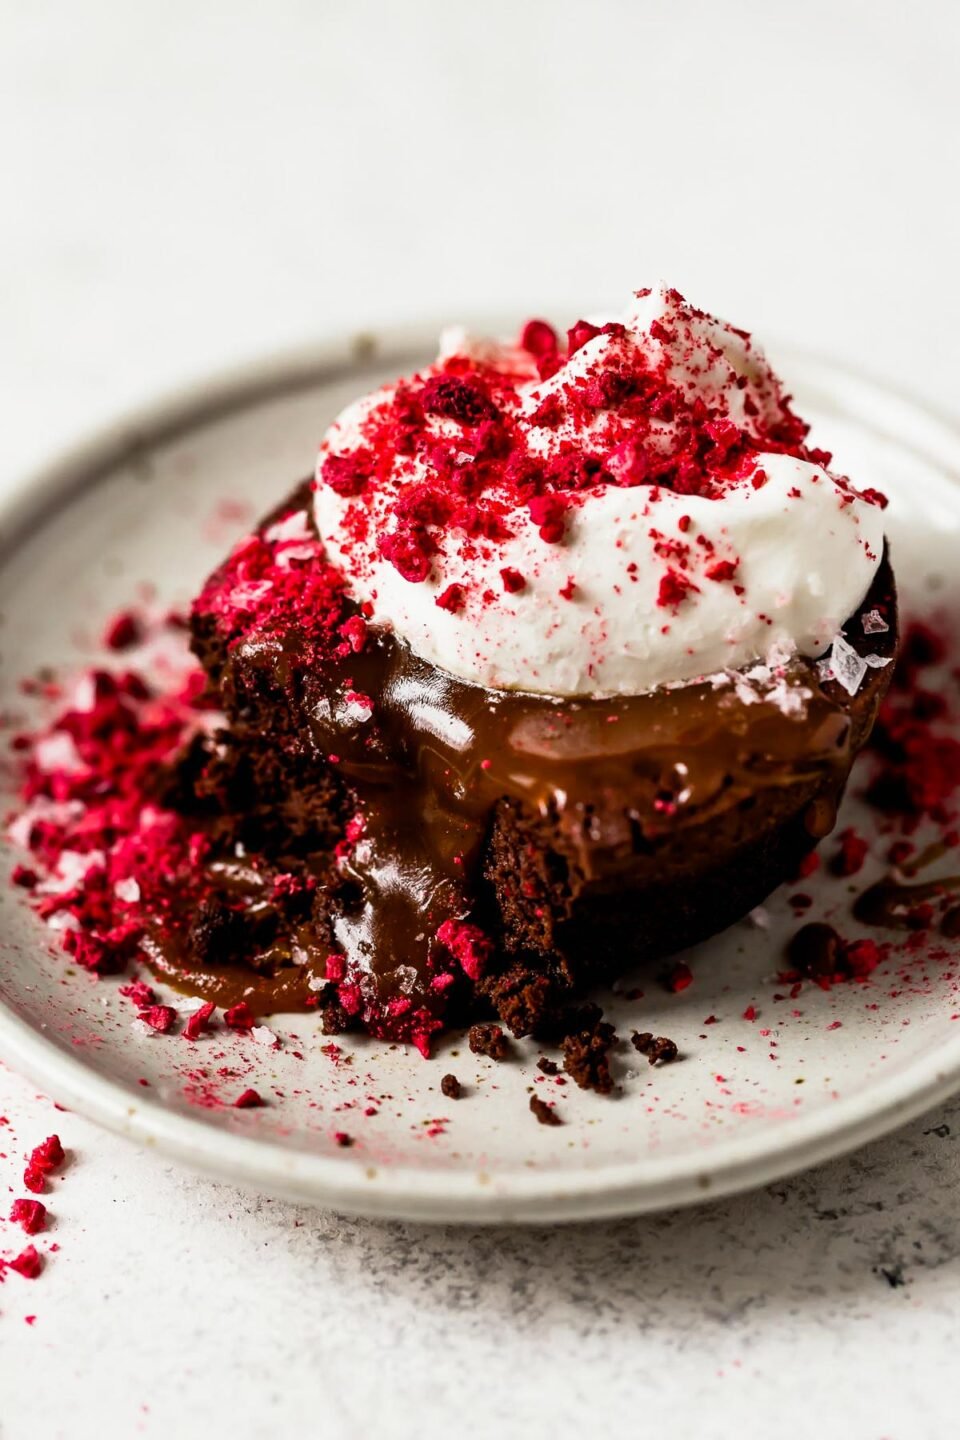 A slightly overhead and side angle shot of a mini flourless chocolate cake that sits atop a light colored ceramic plate. The cake has been topped with caramel, whipped cream, crushed freeze-dried raspberries, and flaky sea salt. The plate sits atop a white textured surface.